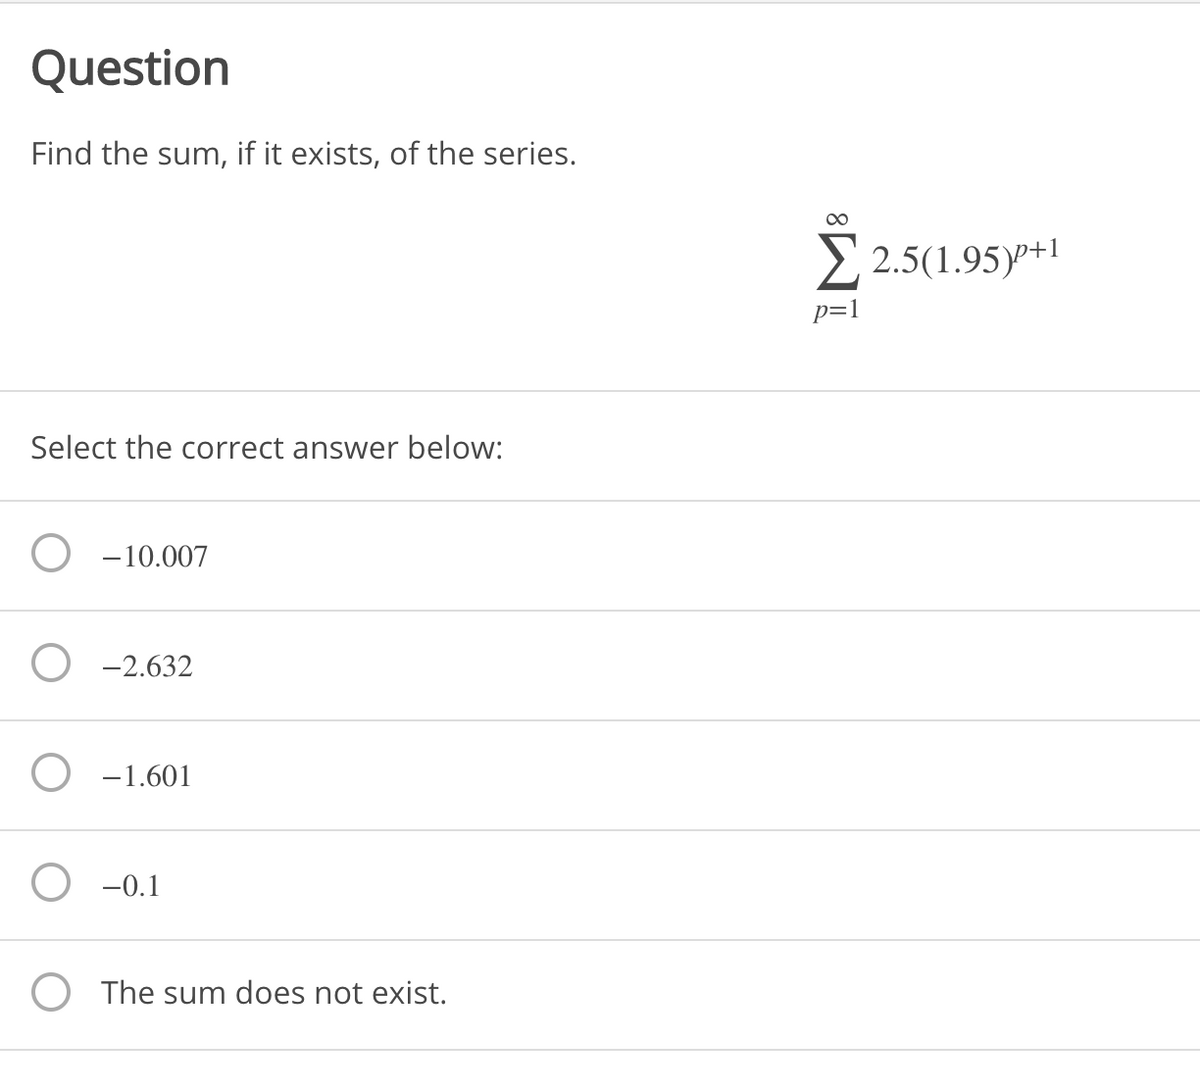 Question
Find the sum, if it exists, of the series.
00
> 2.5(1.95)+1
p=1
Select the correct answer below:
-10.007
-2.632
-1.601
-0.1
The sum does not exist.
